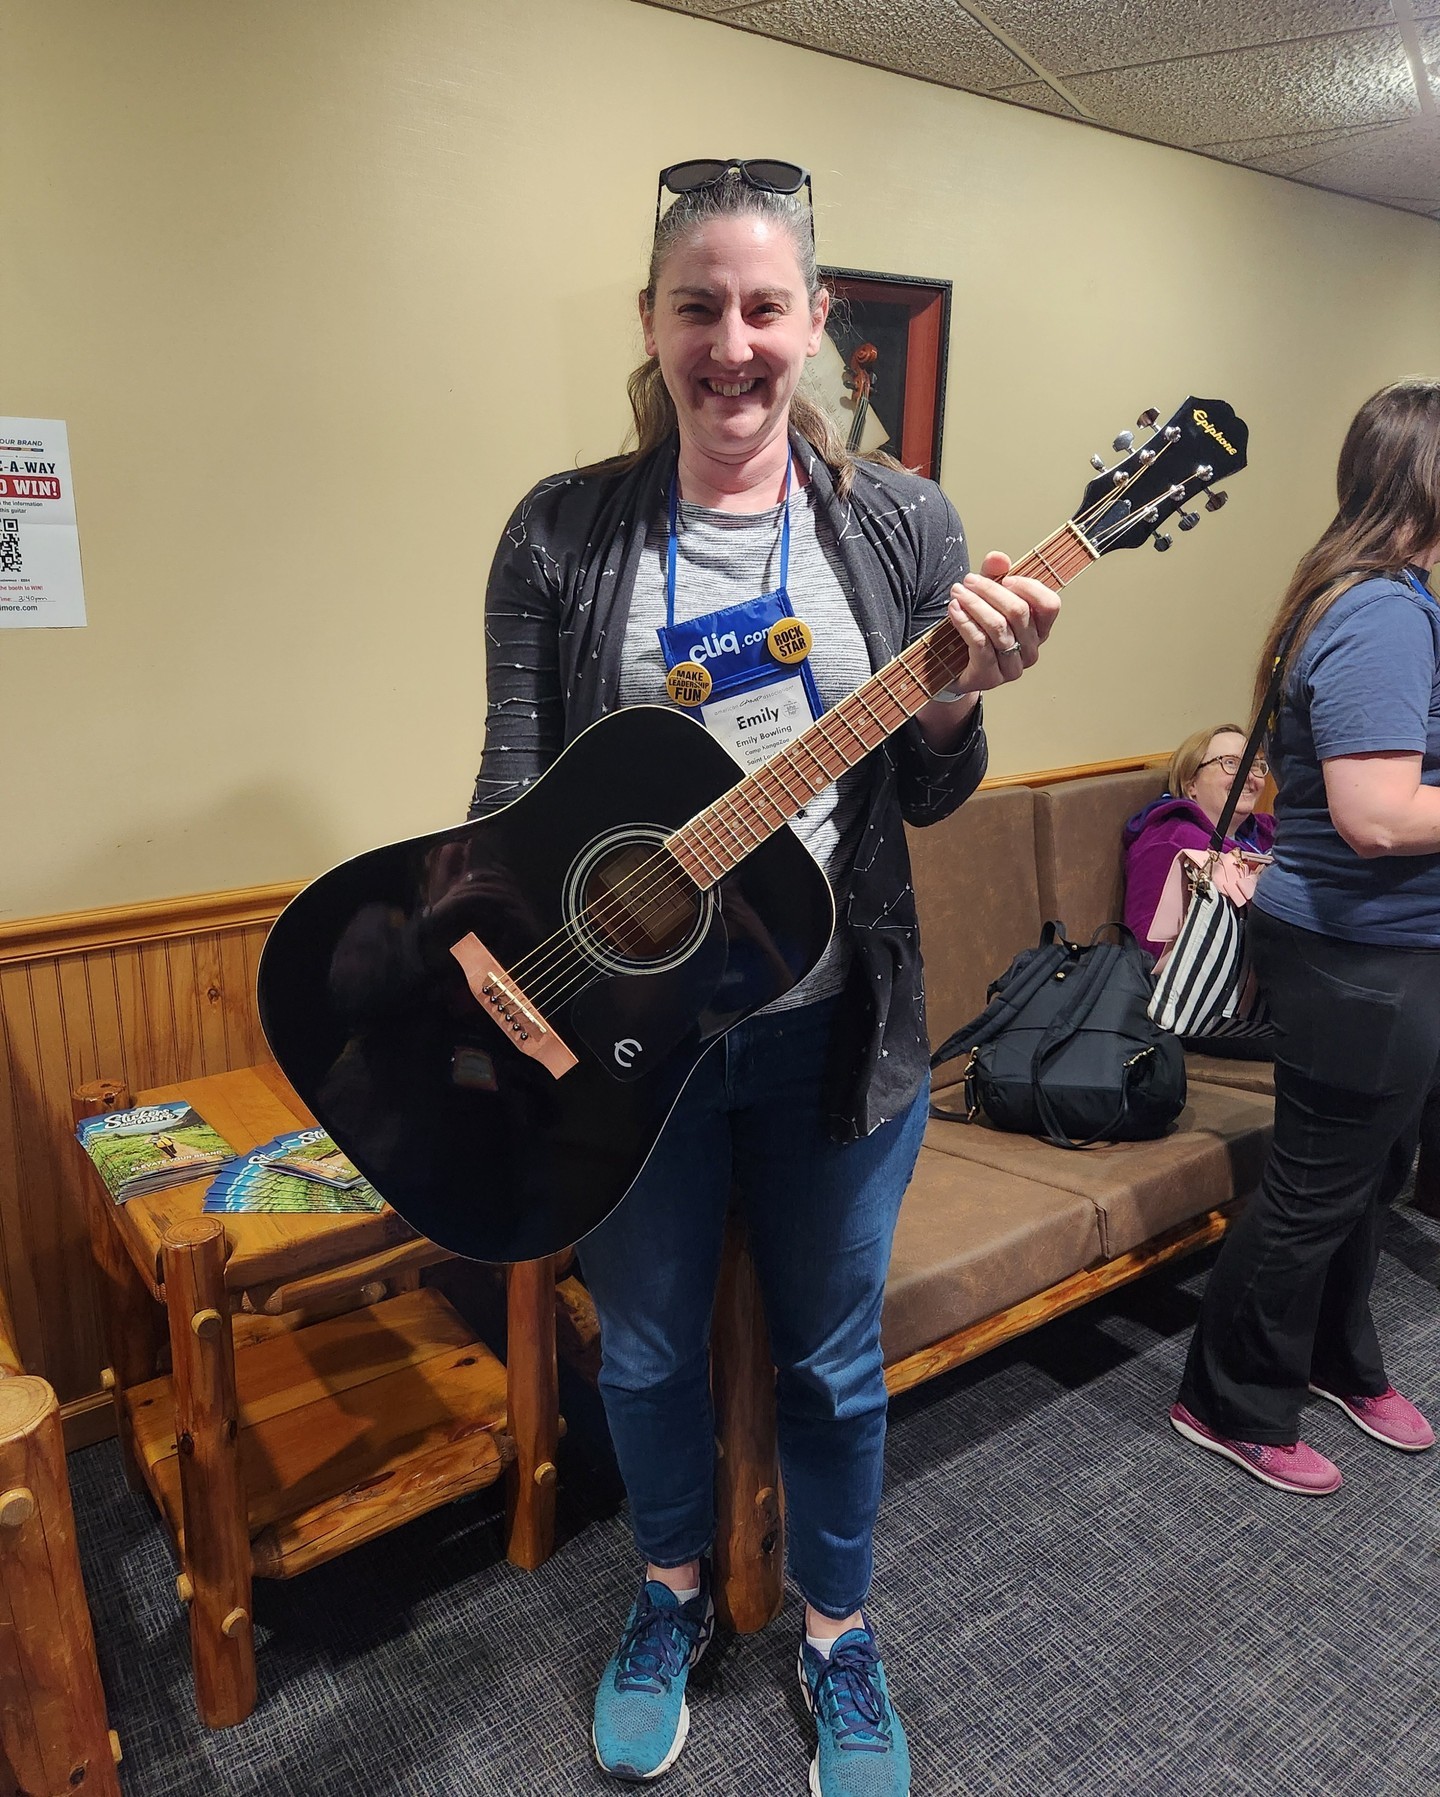 ACA Winding Rivers Conference 💫 

Emily from Camp Kangazoo in Saint Louis is our guitar winner! 

#StickersAndMore
#ElevateYourBrand